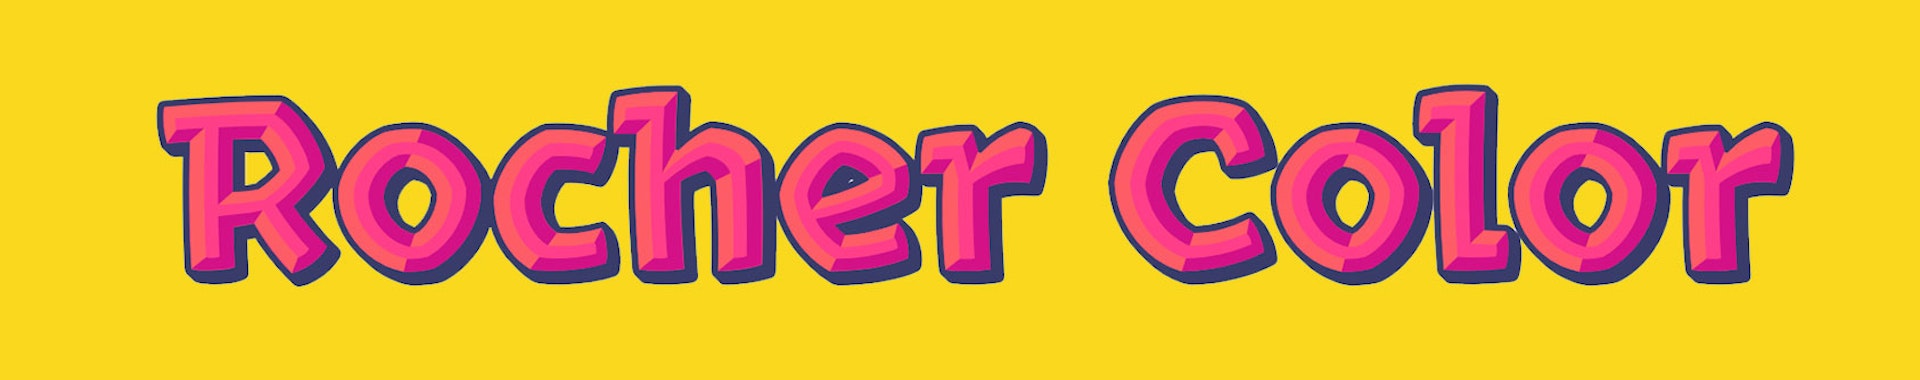 Example of Rocher Color font in pink navy and yellow